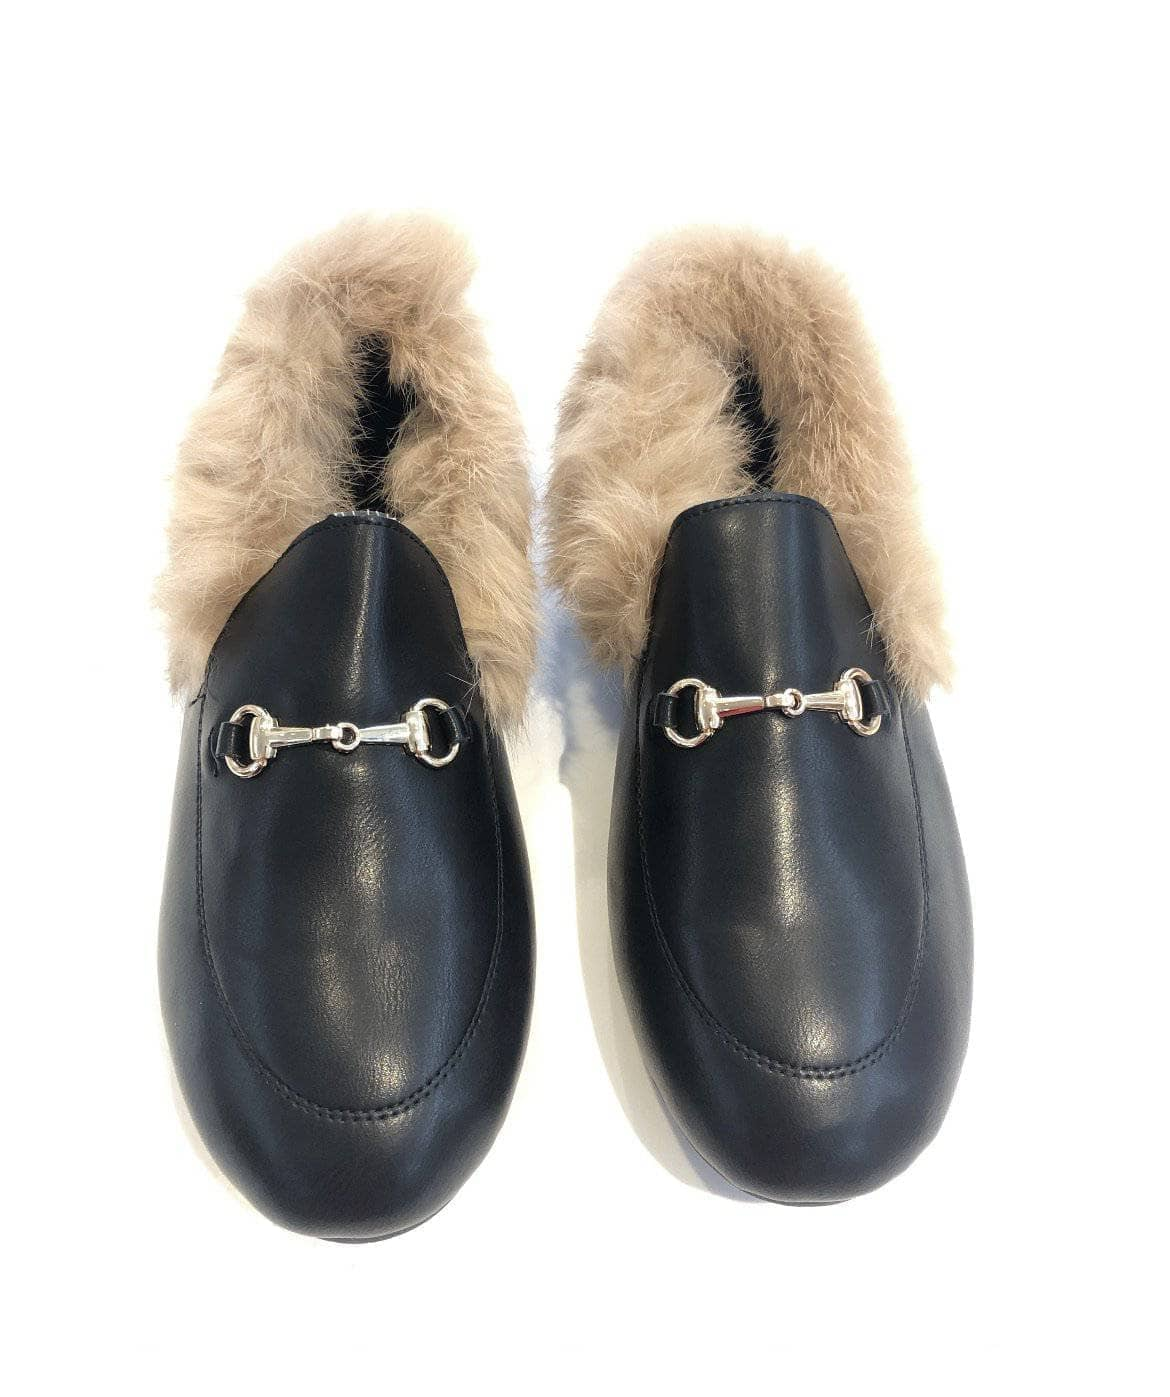 Fall in Love with Lola and the Boys Best-Selling Loafers